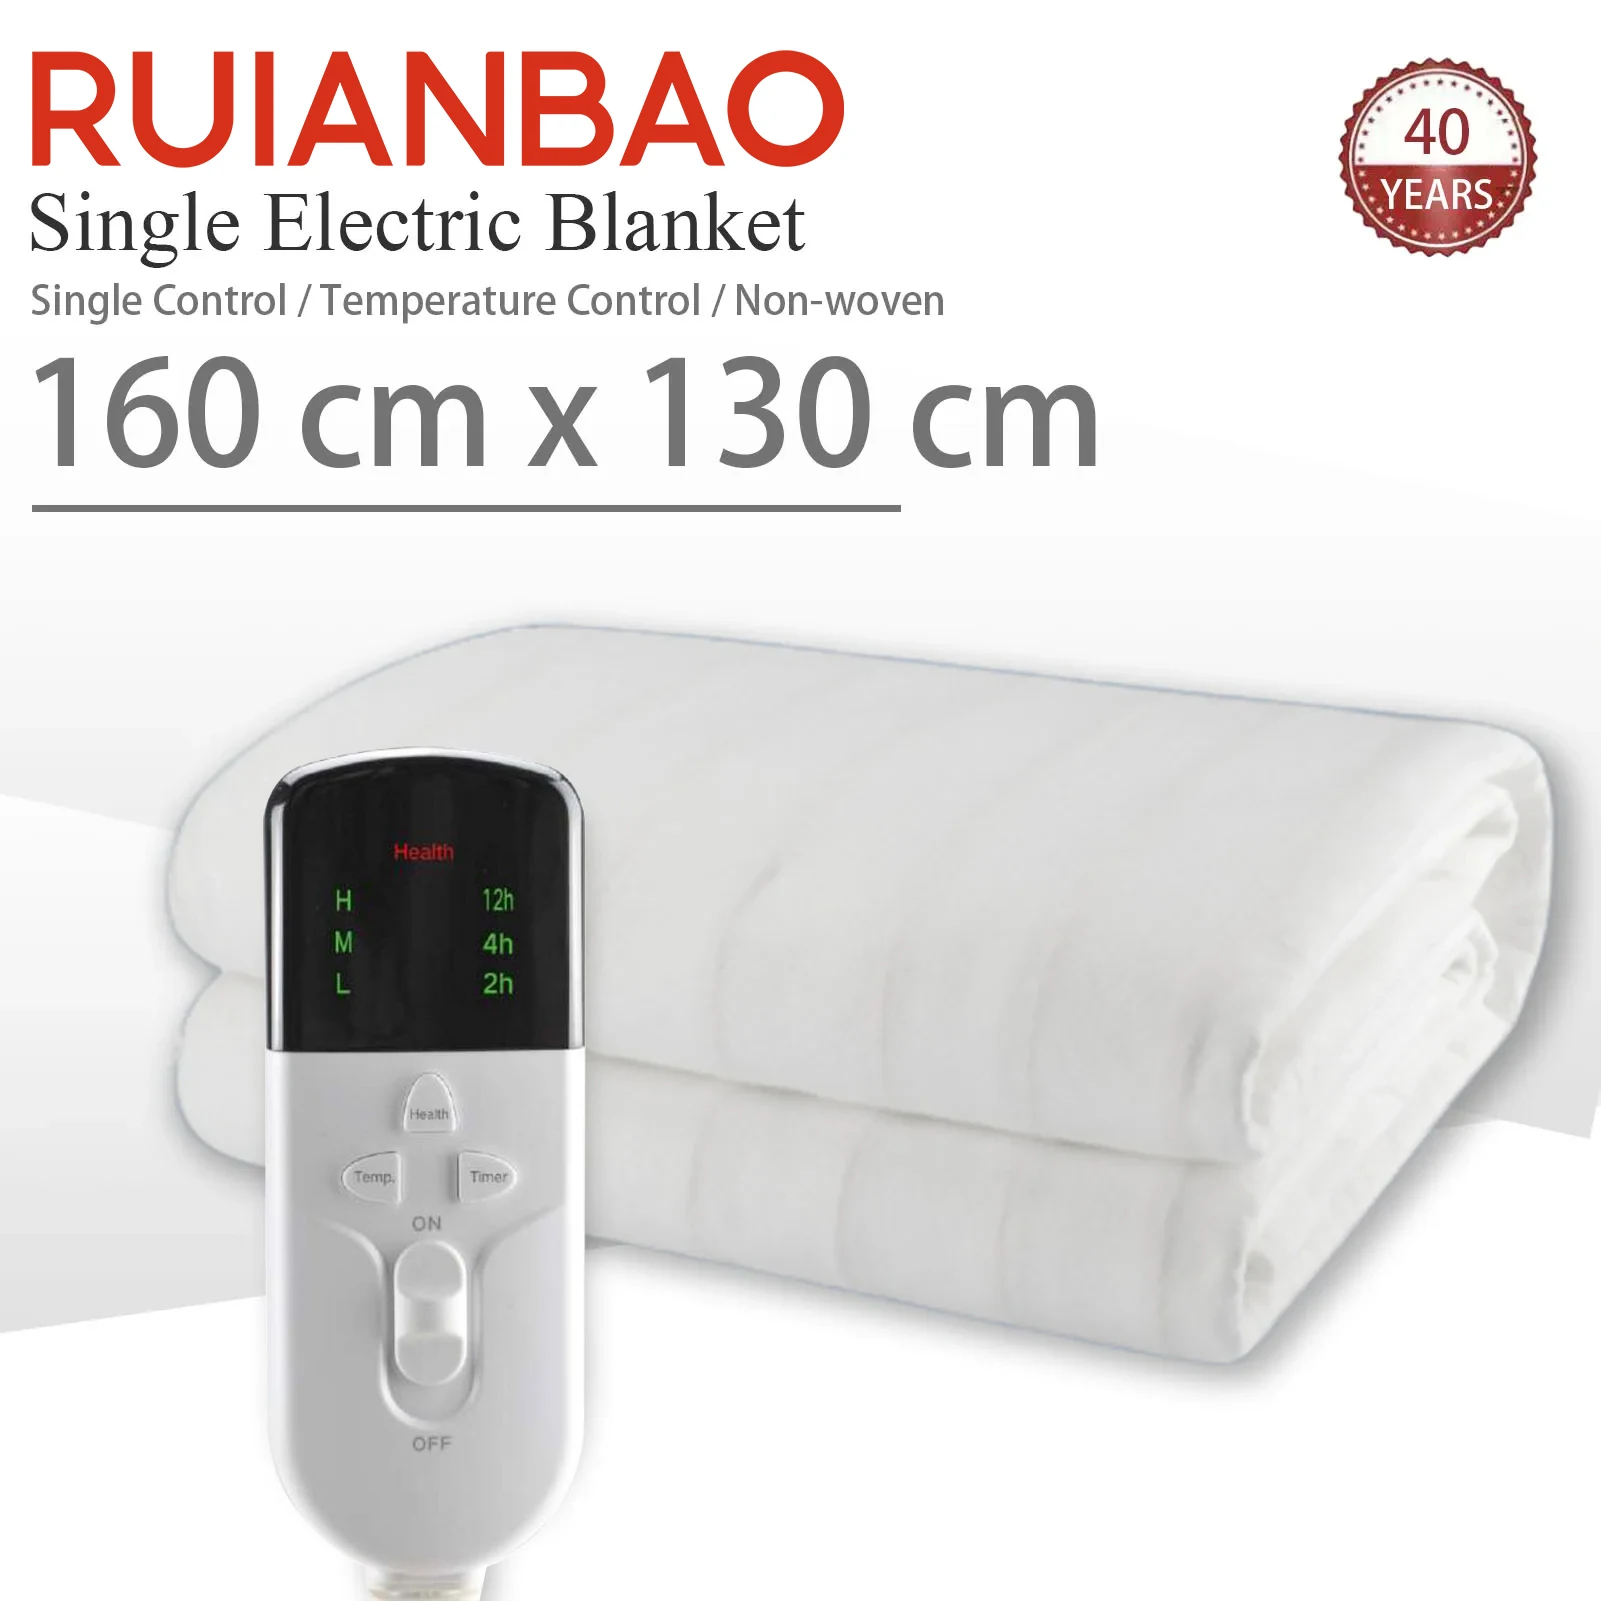 ruianbao-velvet-blanket-230v-electric-blanket-household-lightweight-thickened-double-comfortable-removable-washable-blanket